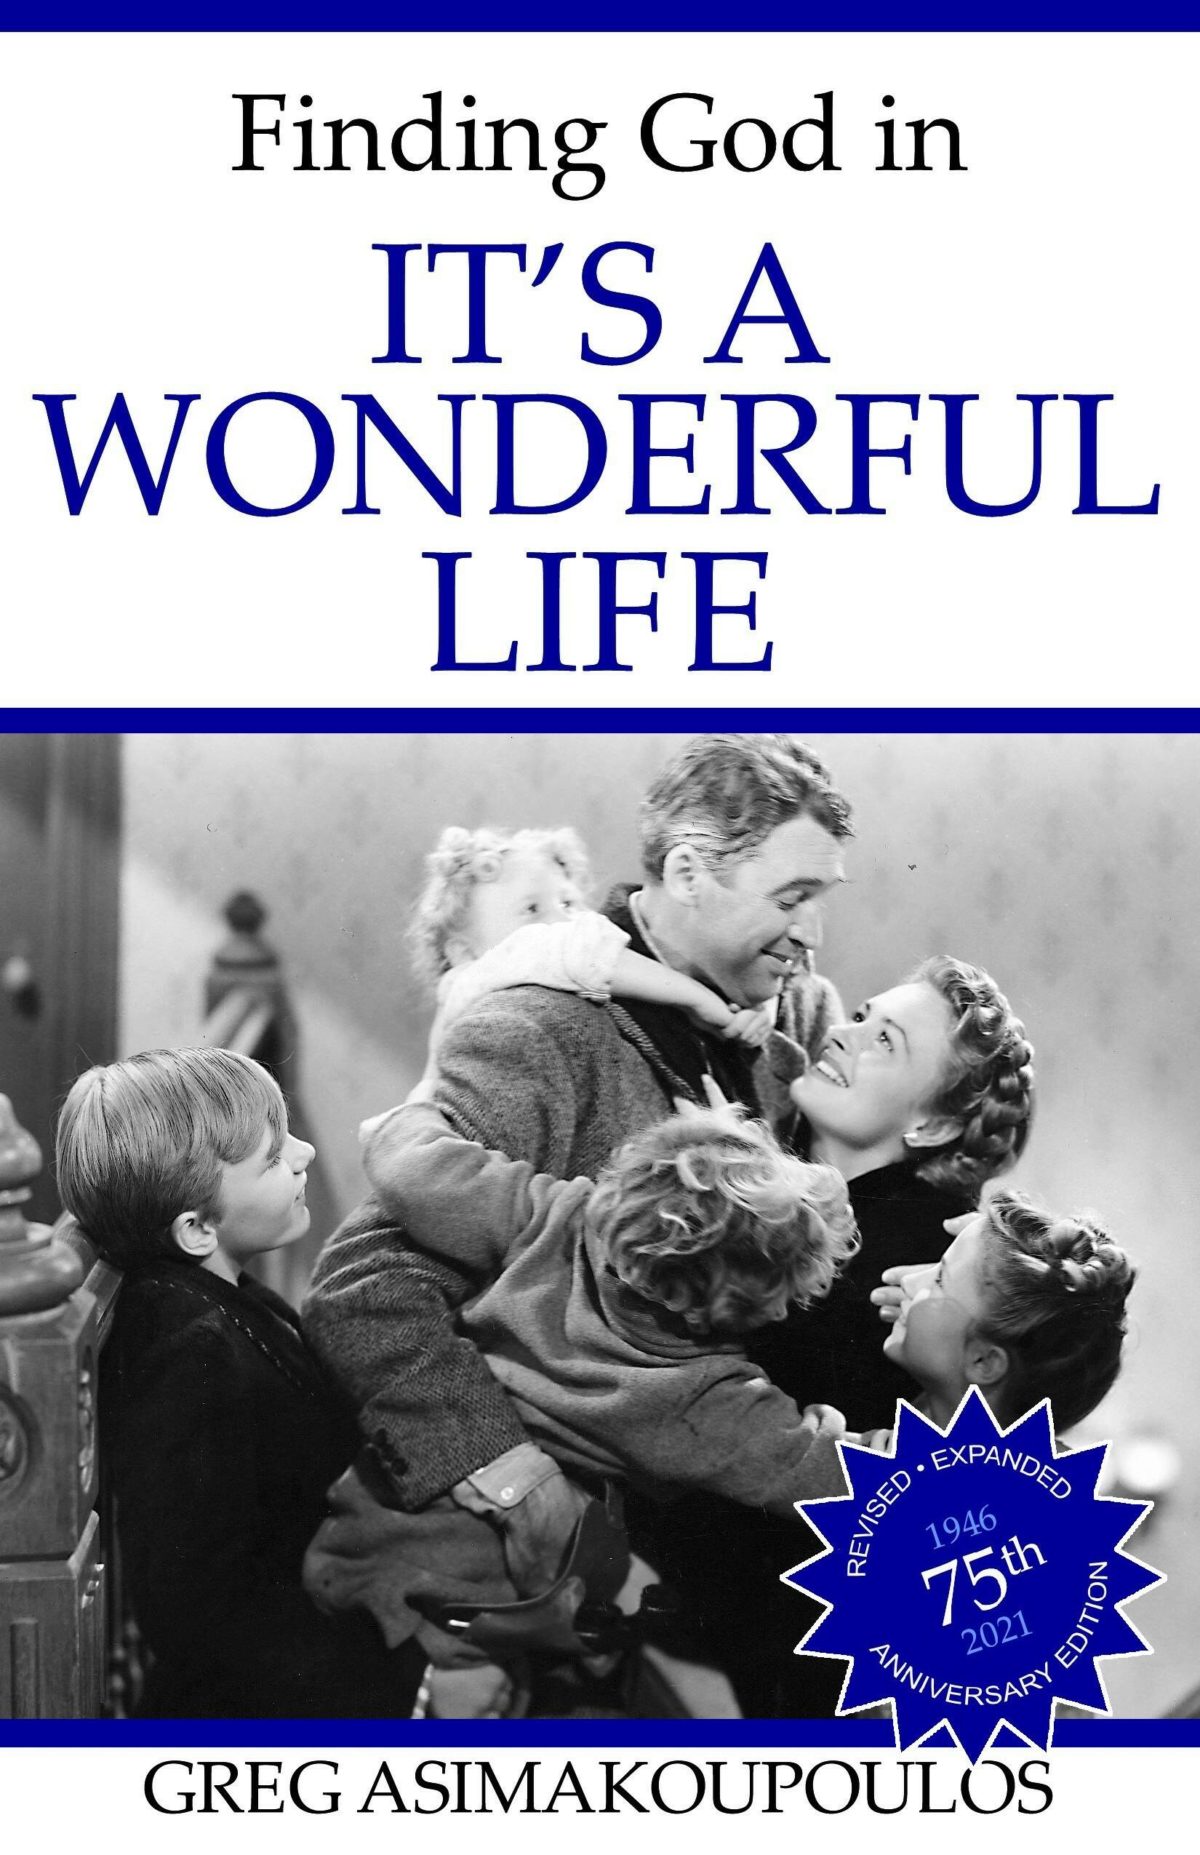 Asimakoupoulos to appear at It’s a Wonderful Life Festival Mercer